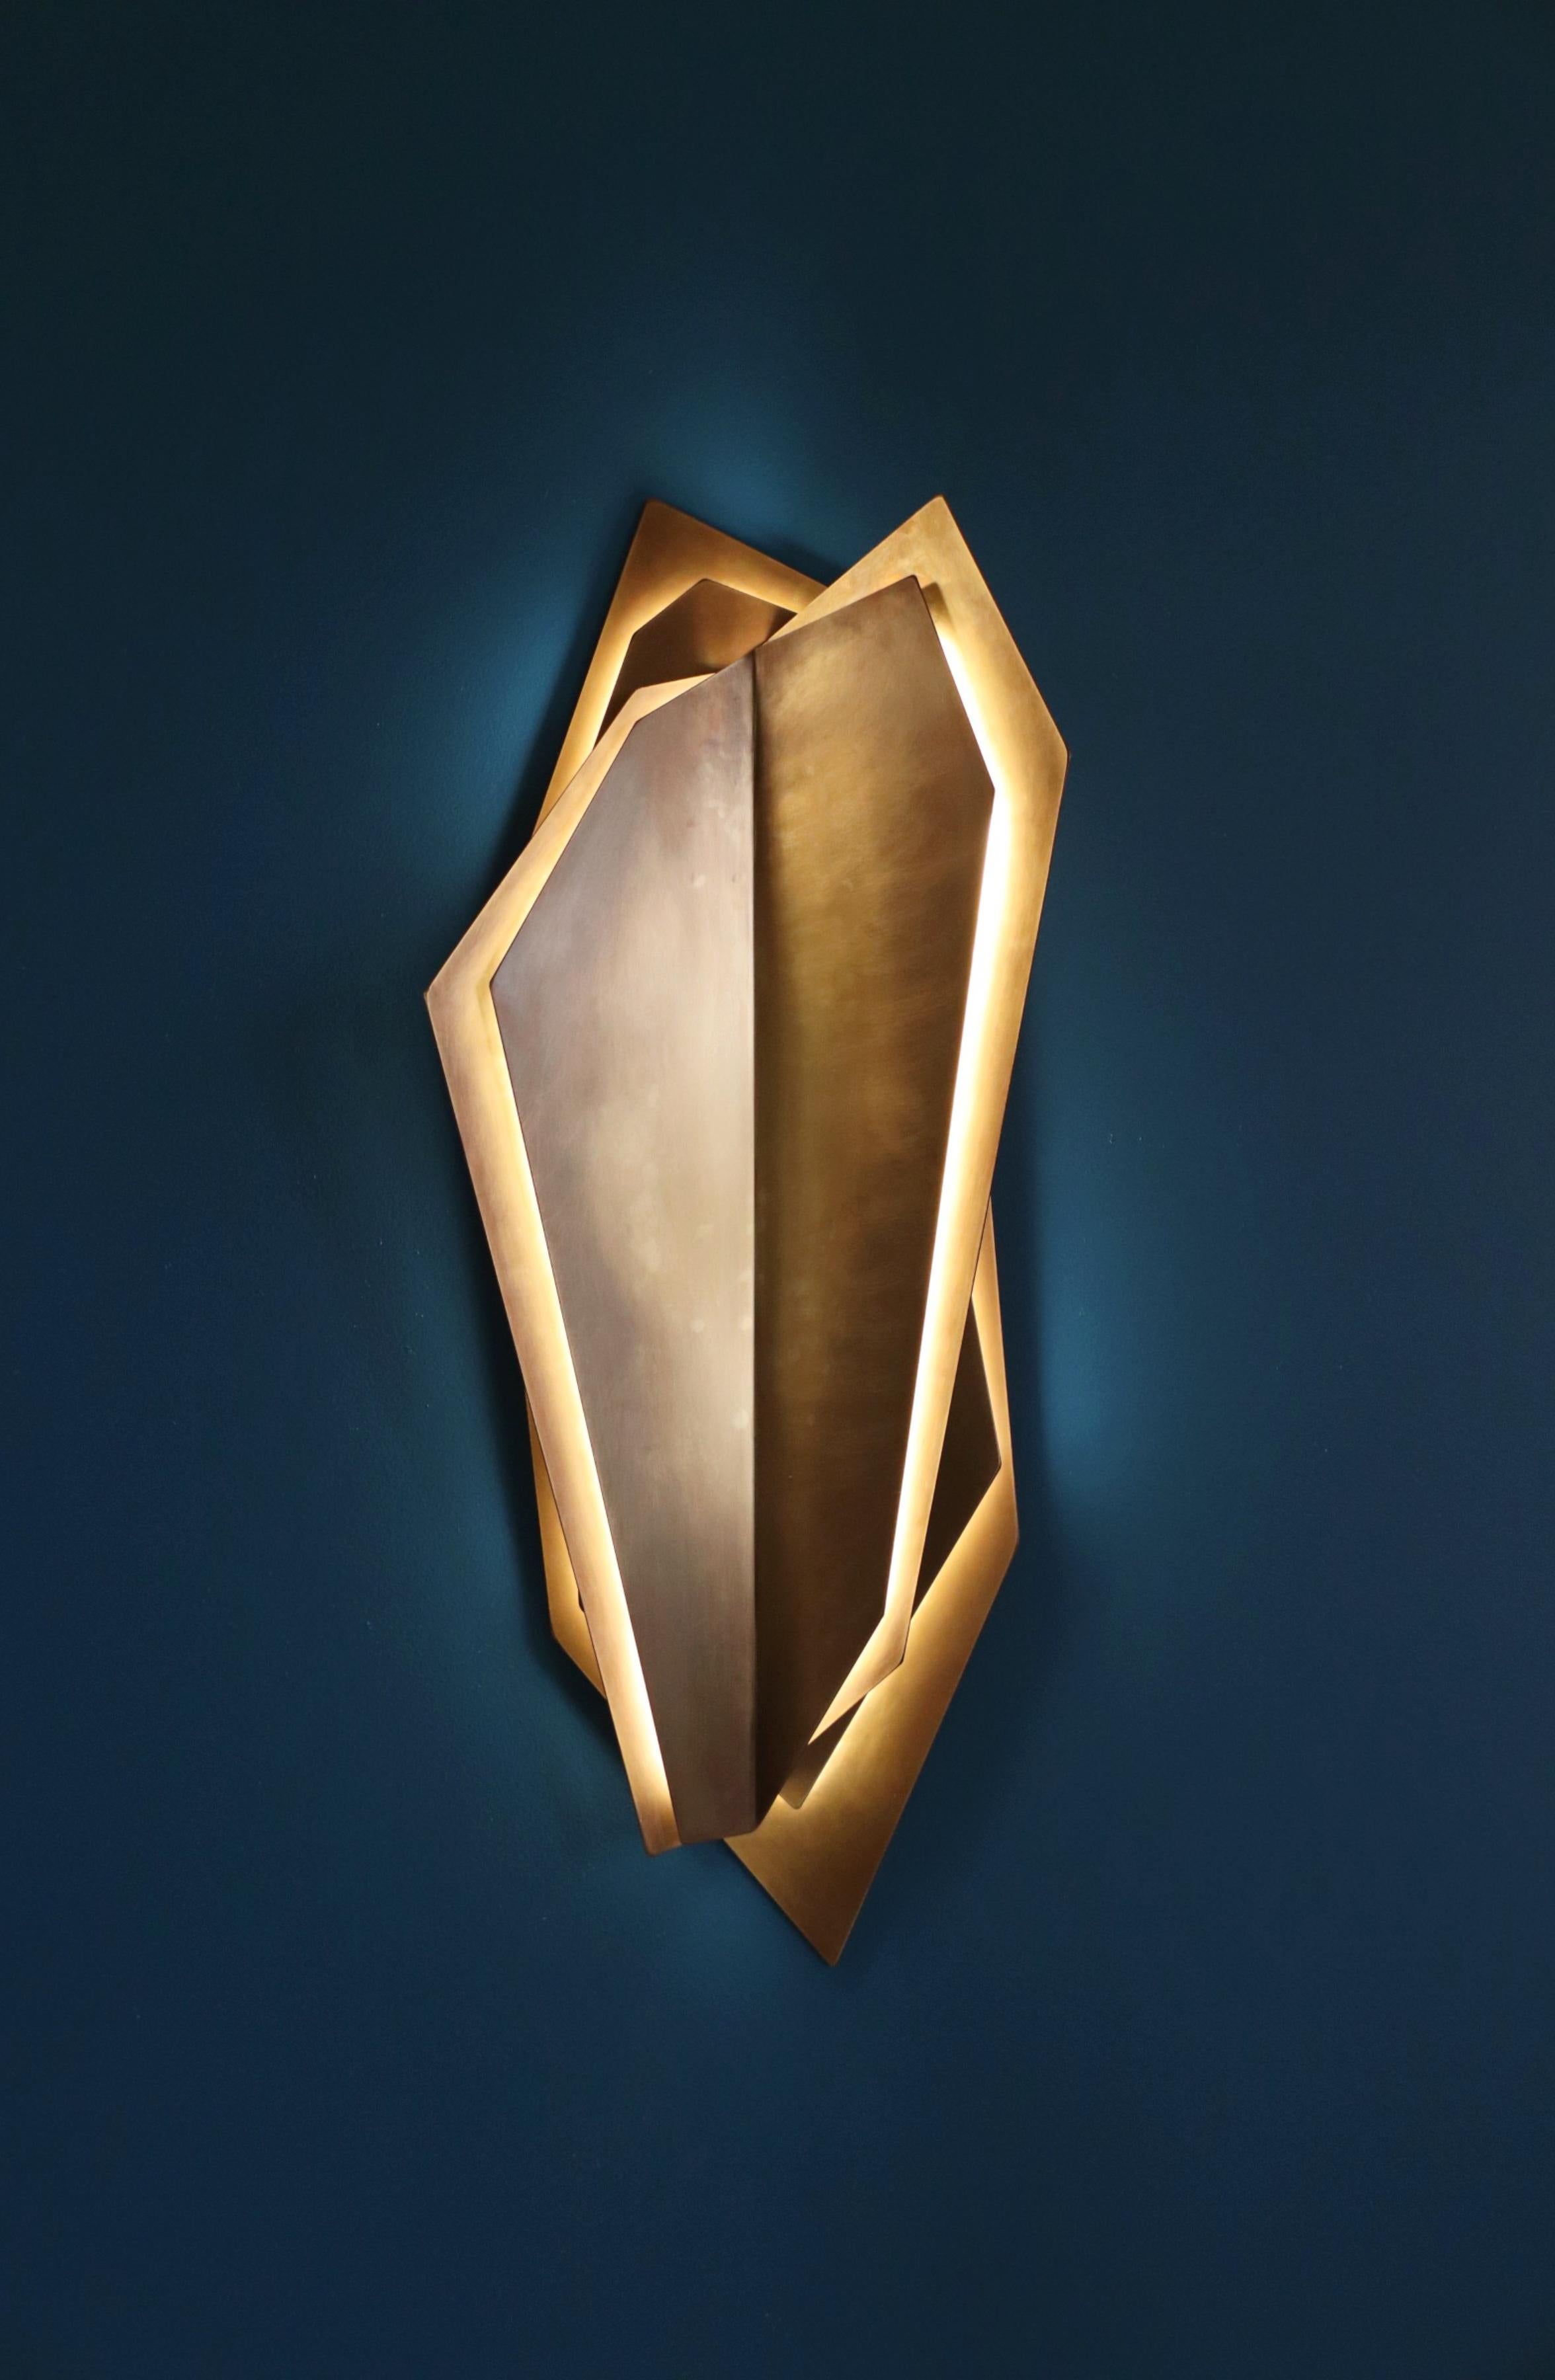 Continuum 900 Wall Sconce by Lost Profile Studio
Dimensions: W 38 x D 12 x H 90 cm 
Materials: Brass, Glass, Aluminium, LED
Finishes:
Aged Brass (waxed)
Blonde Brass (waxed)
Brushed Aluminium (waxed)

Notes: 12v light fixture, supplied with a 12v,